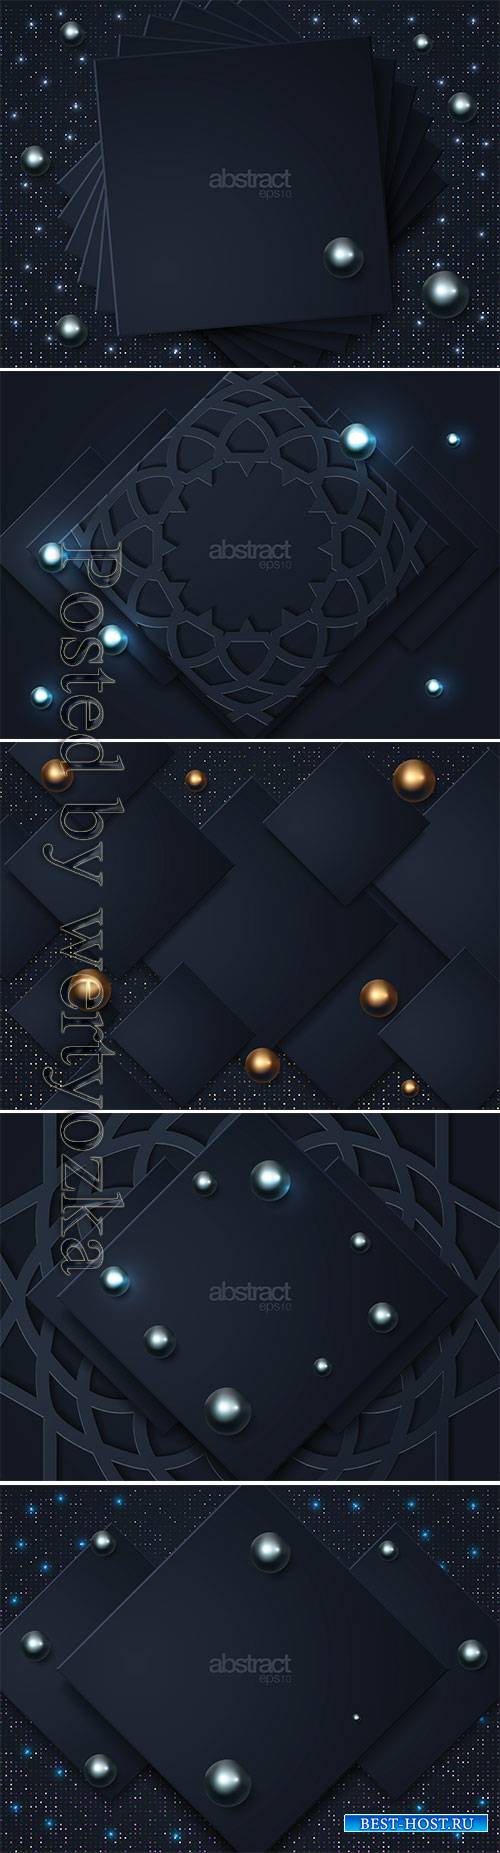 Abstract 3d background with pearls